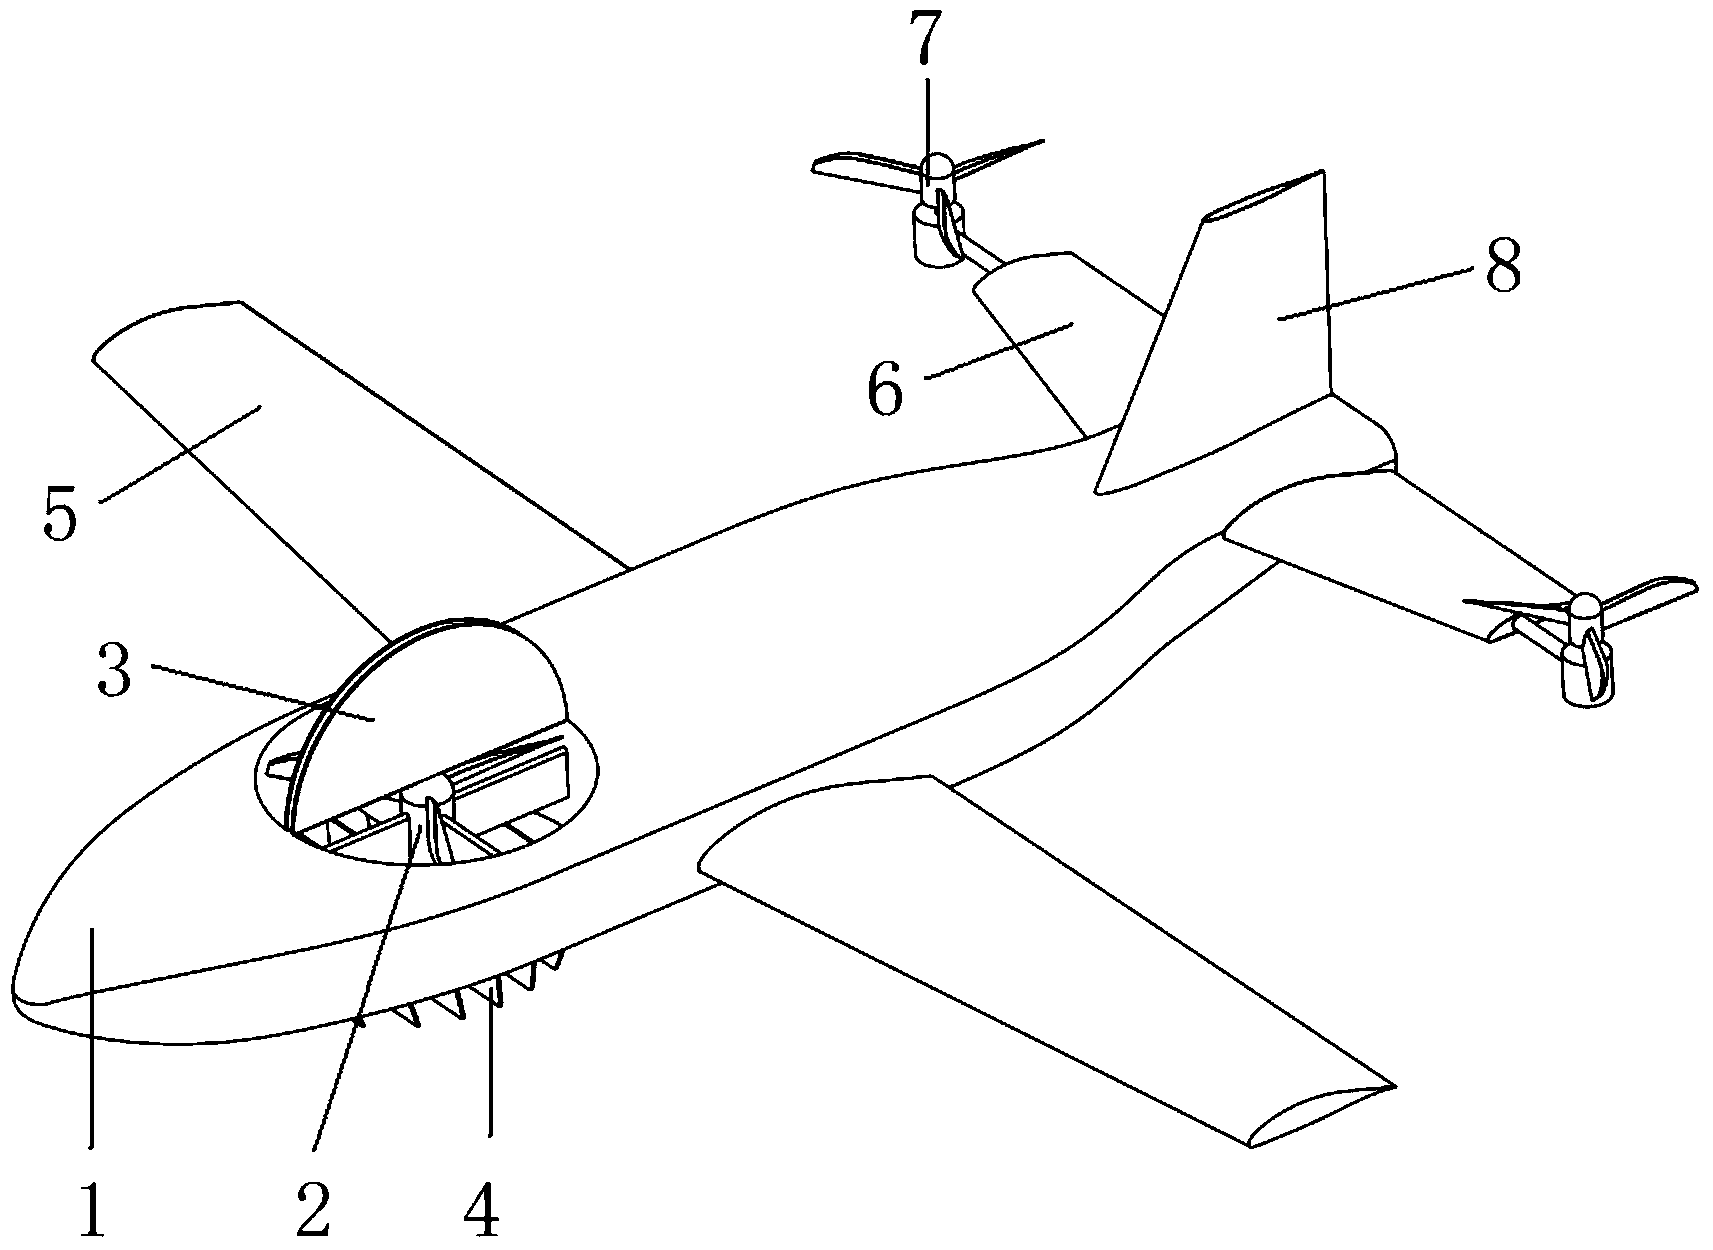 Aircraft capable of vertically taking off and landing at high speed